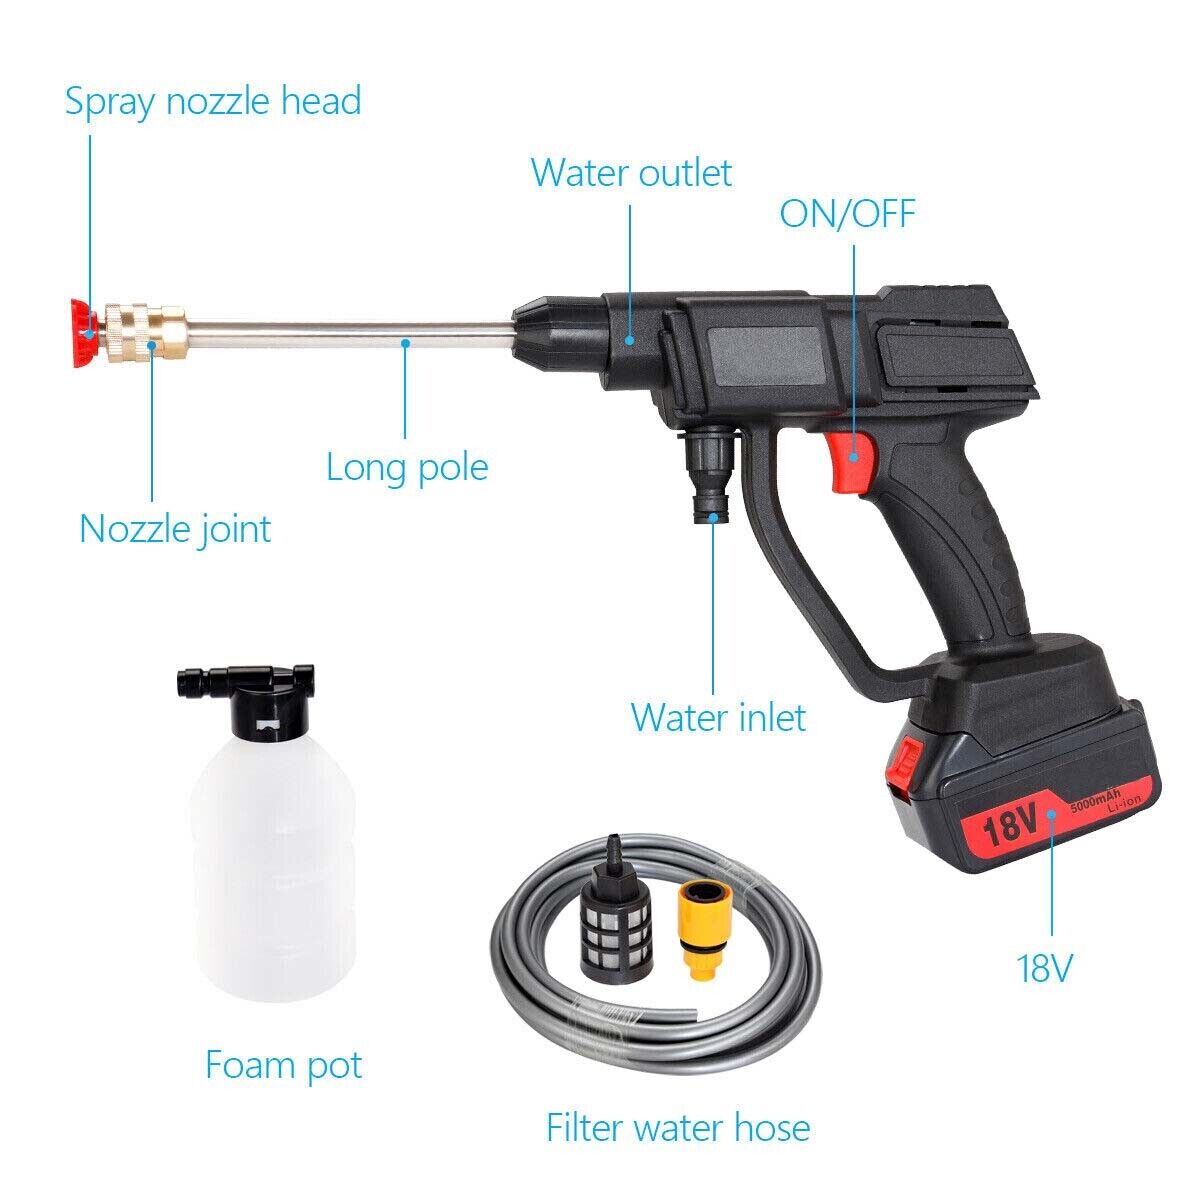 Cordless Electric High Pressure Water Spray Gun Car Washer Cleaner W/ 2 Battery